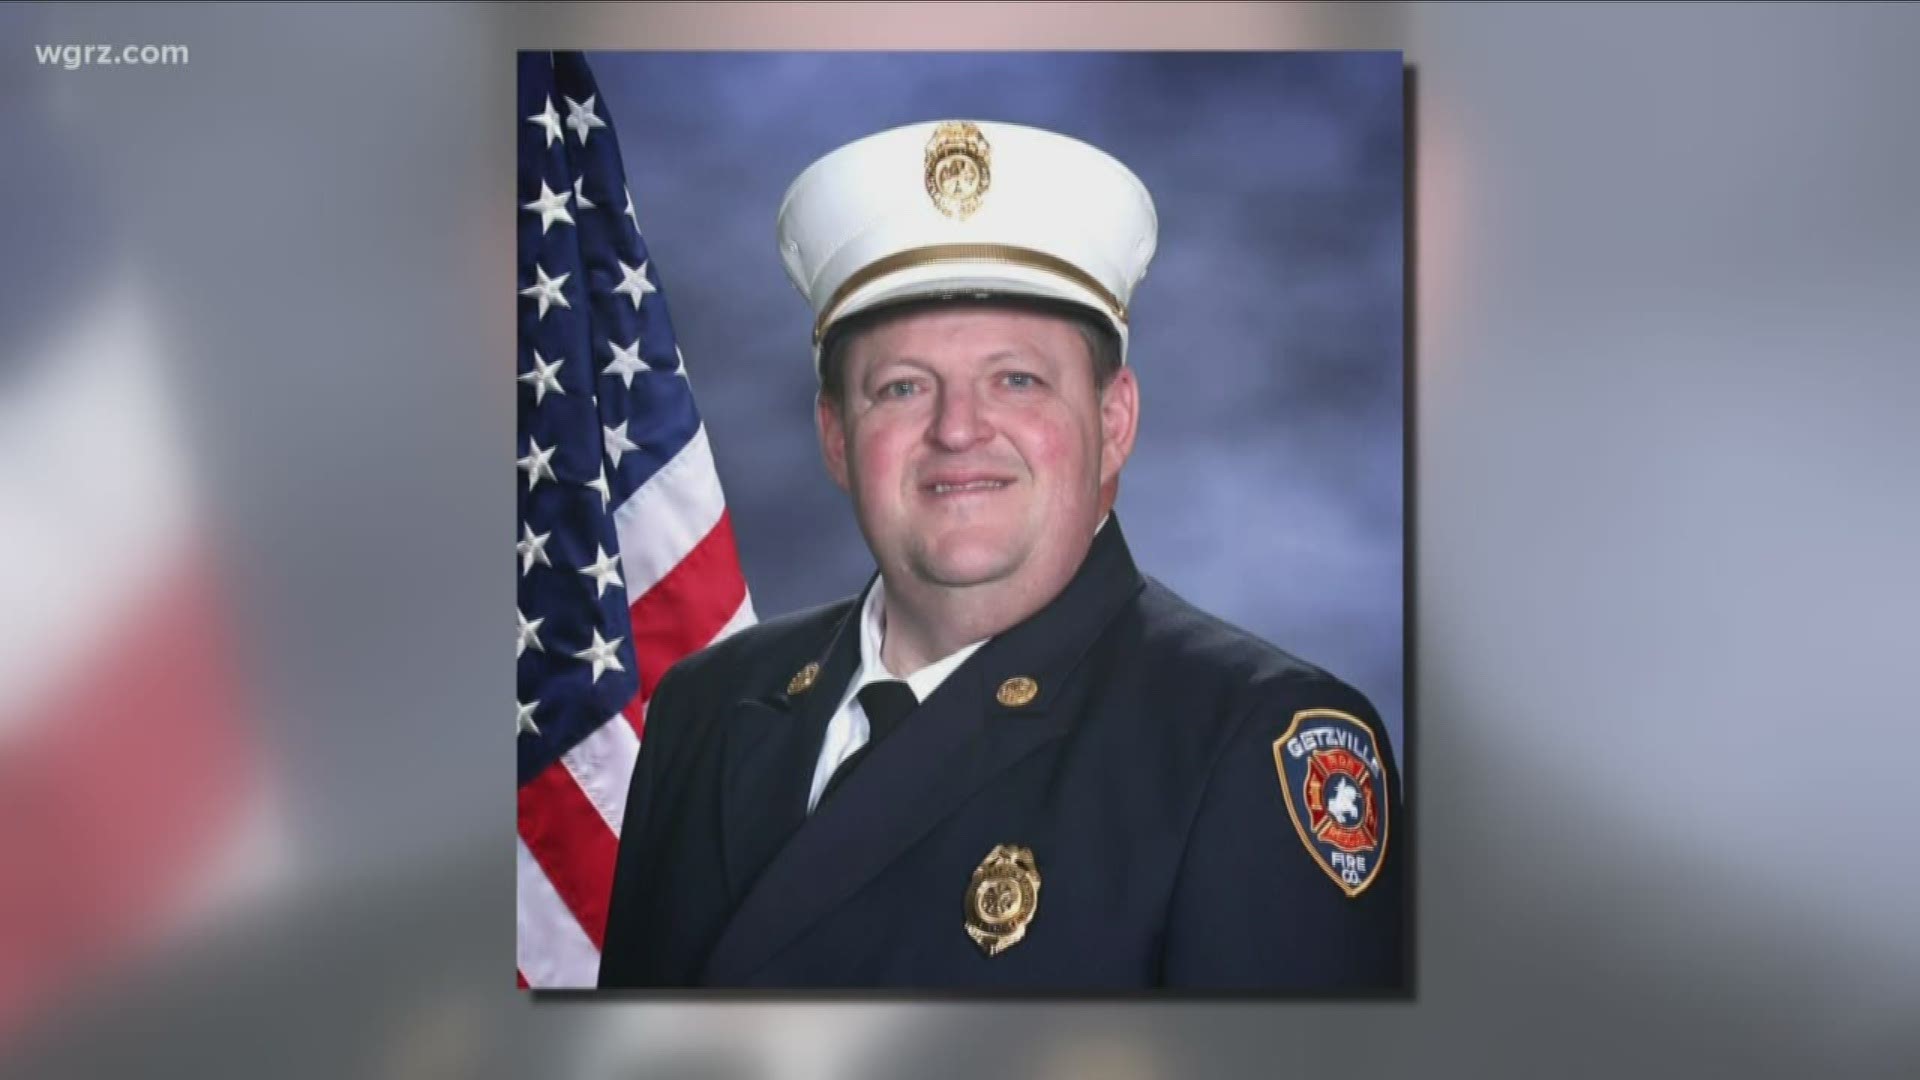 Remembering Getzville fire chief Isenberg